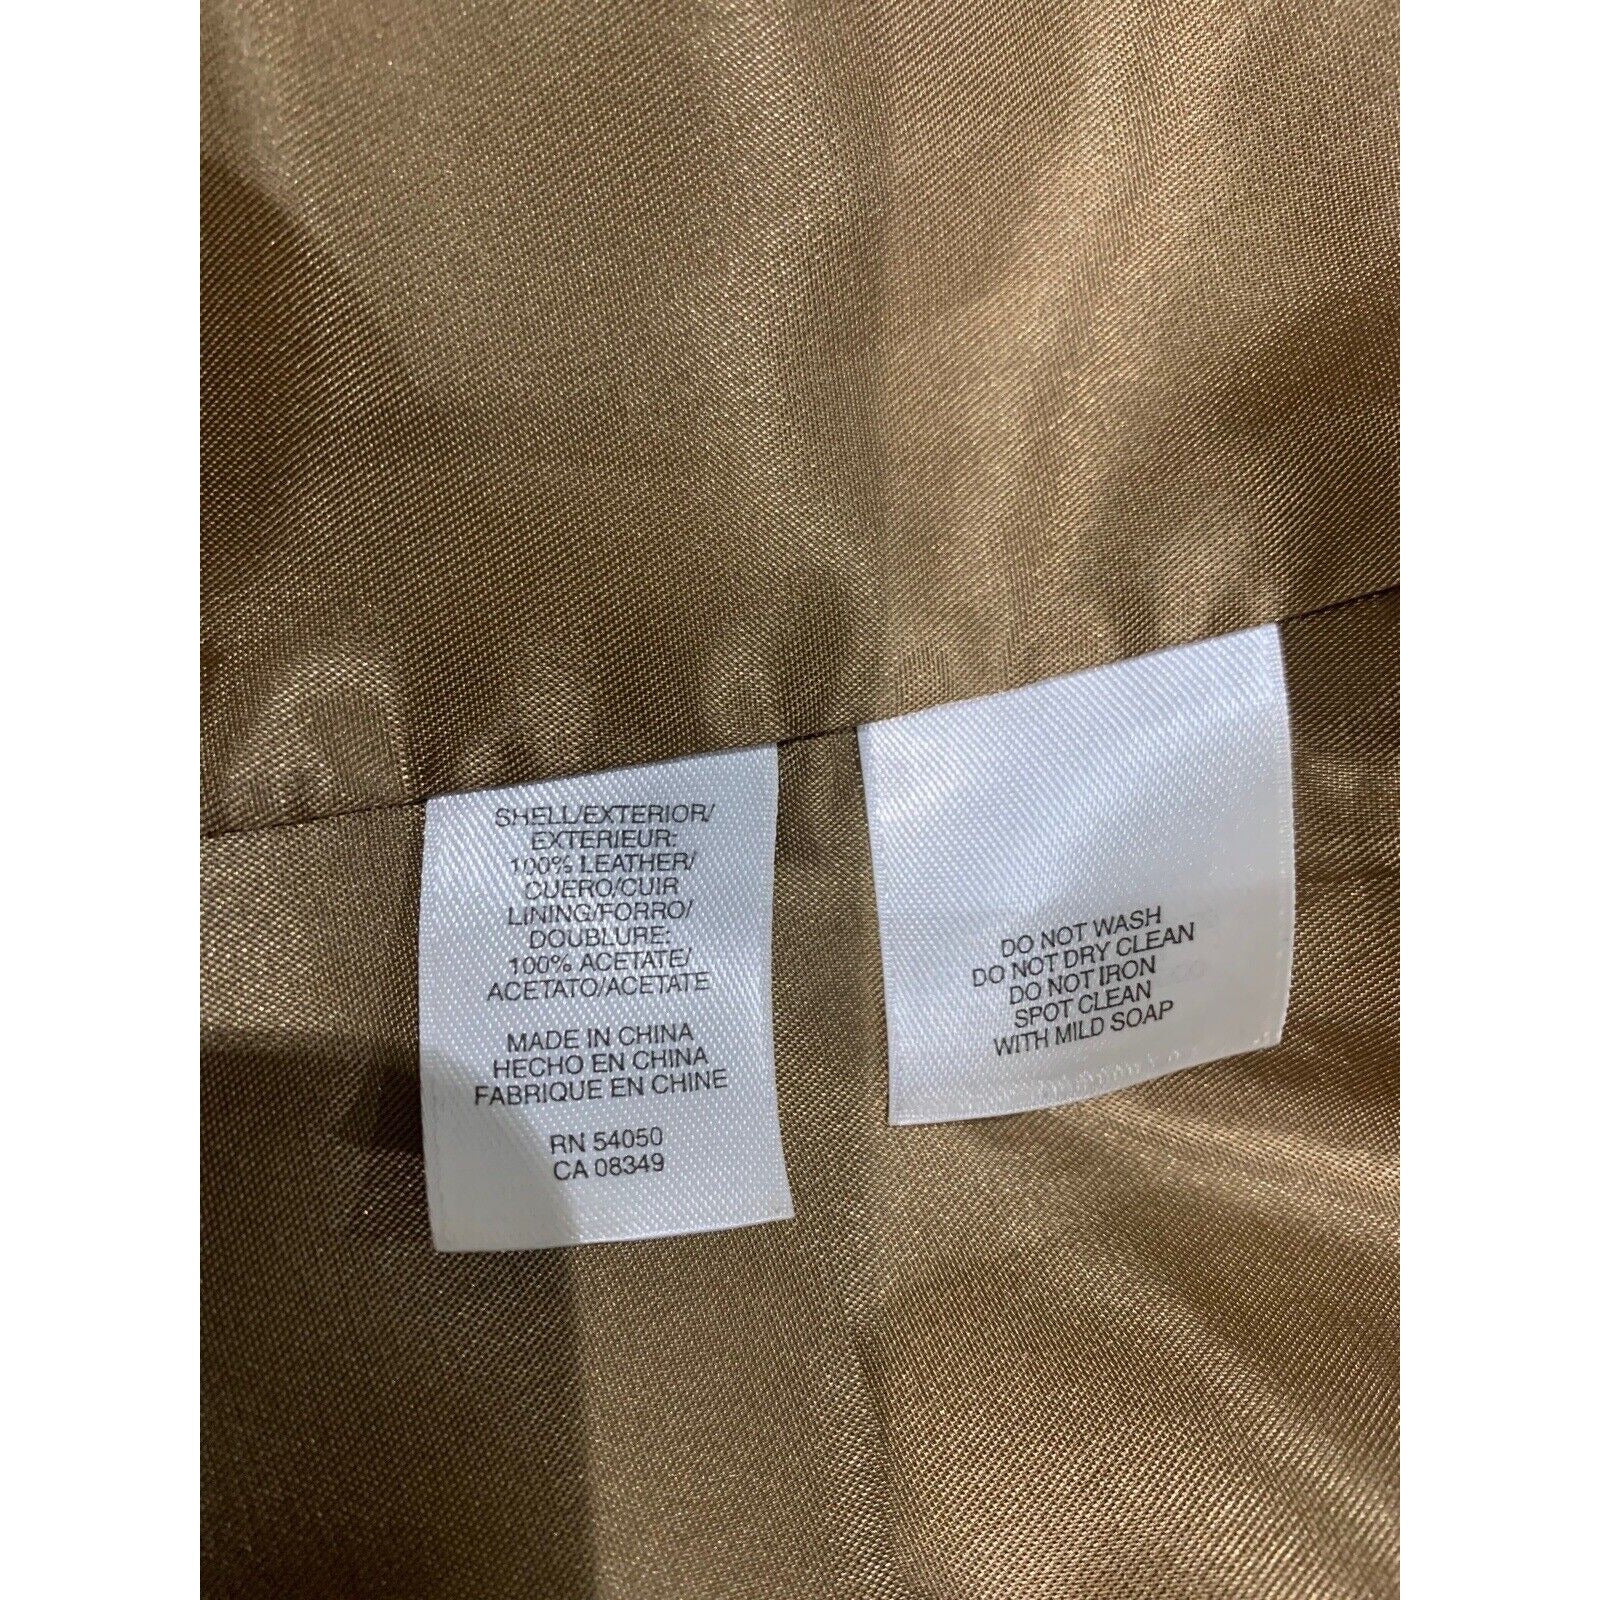 Fabric Info And Care Instructions